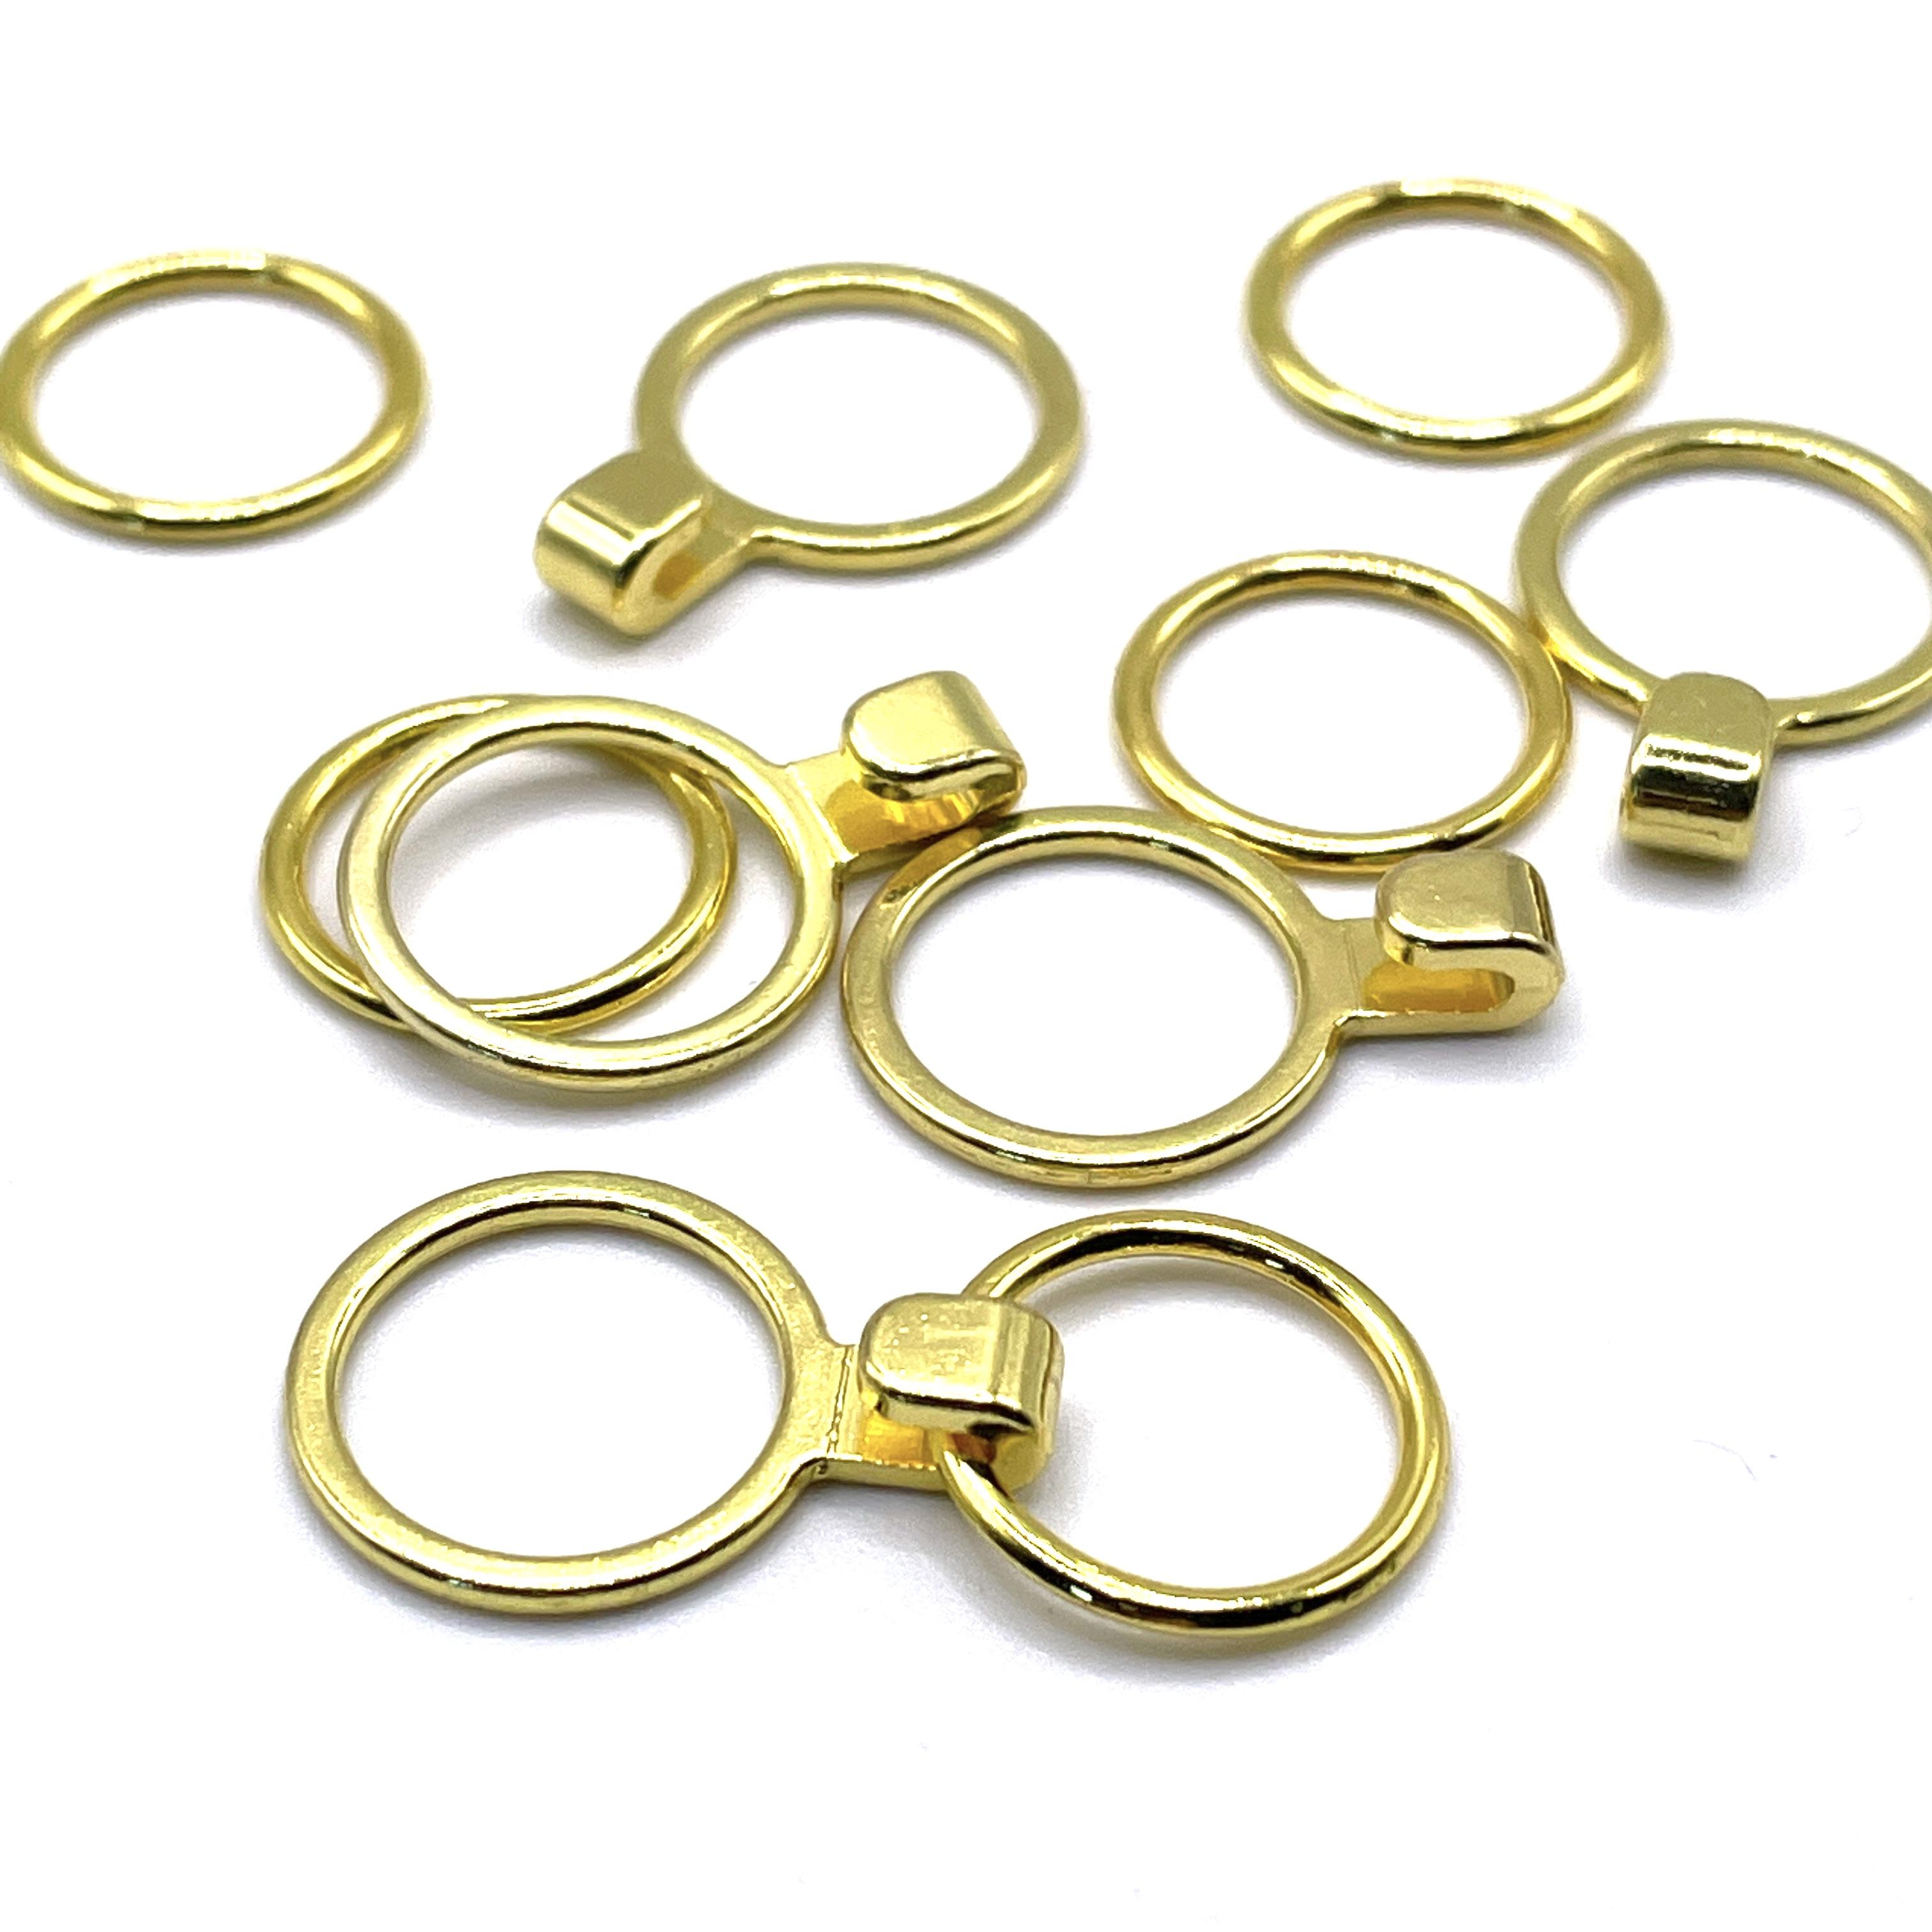 https://cdn.ecommercedns.uk/files/6/235836/5/22395675/hook-and-ring-set-in-bright-gold-12mm.jpg